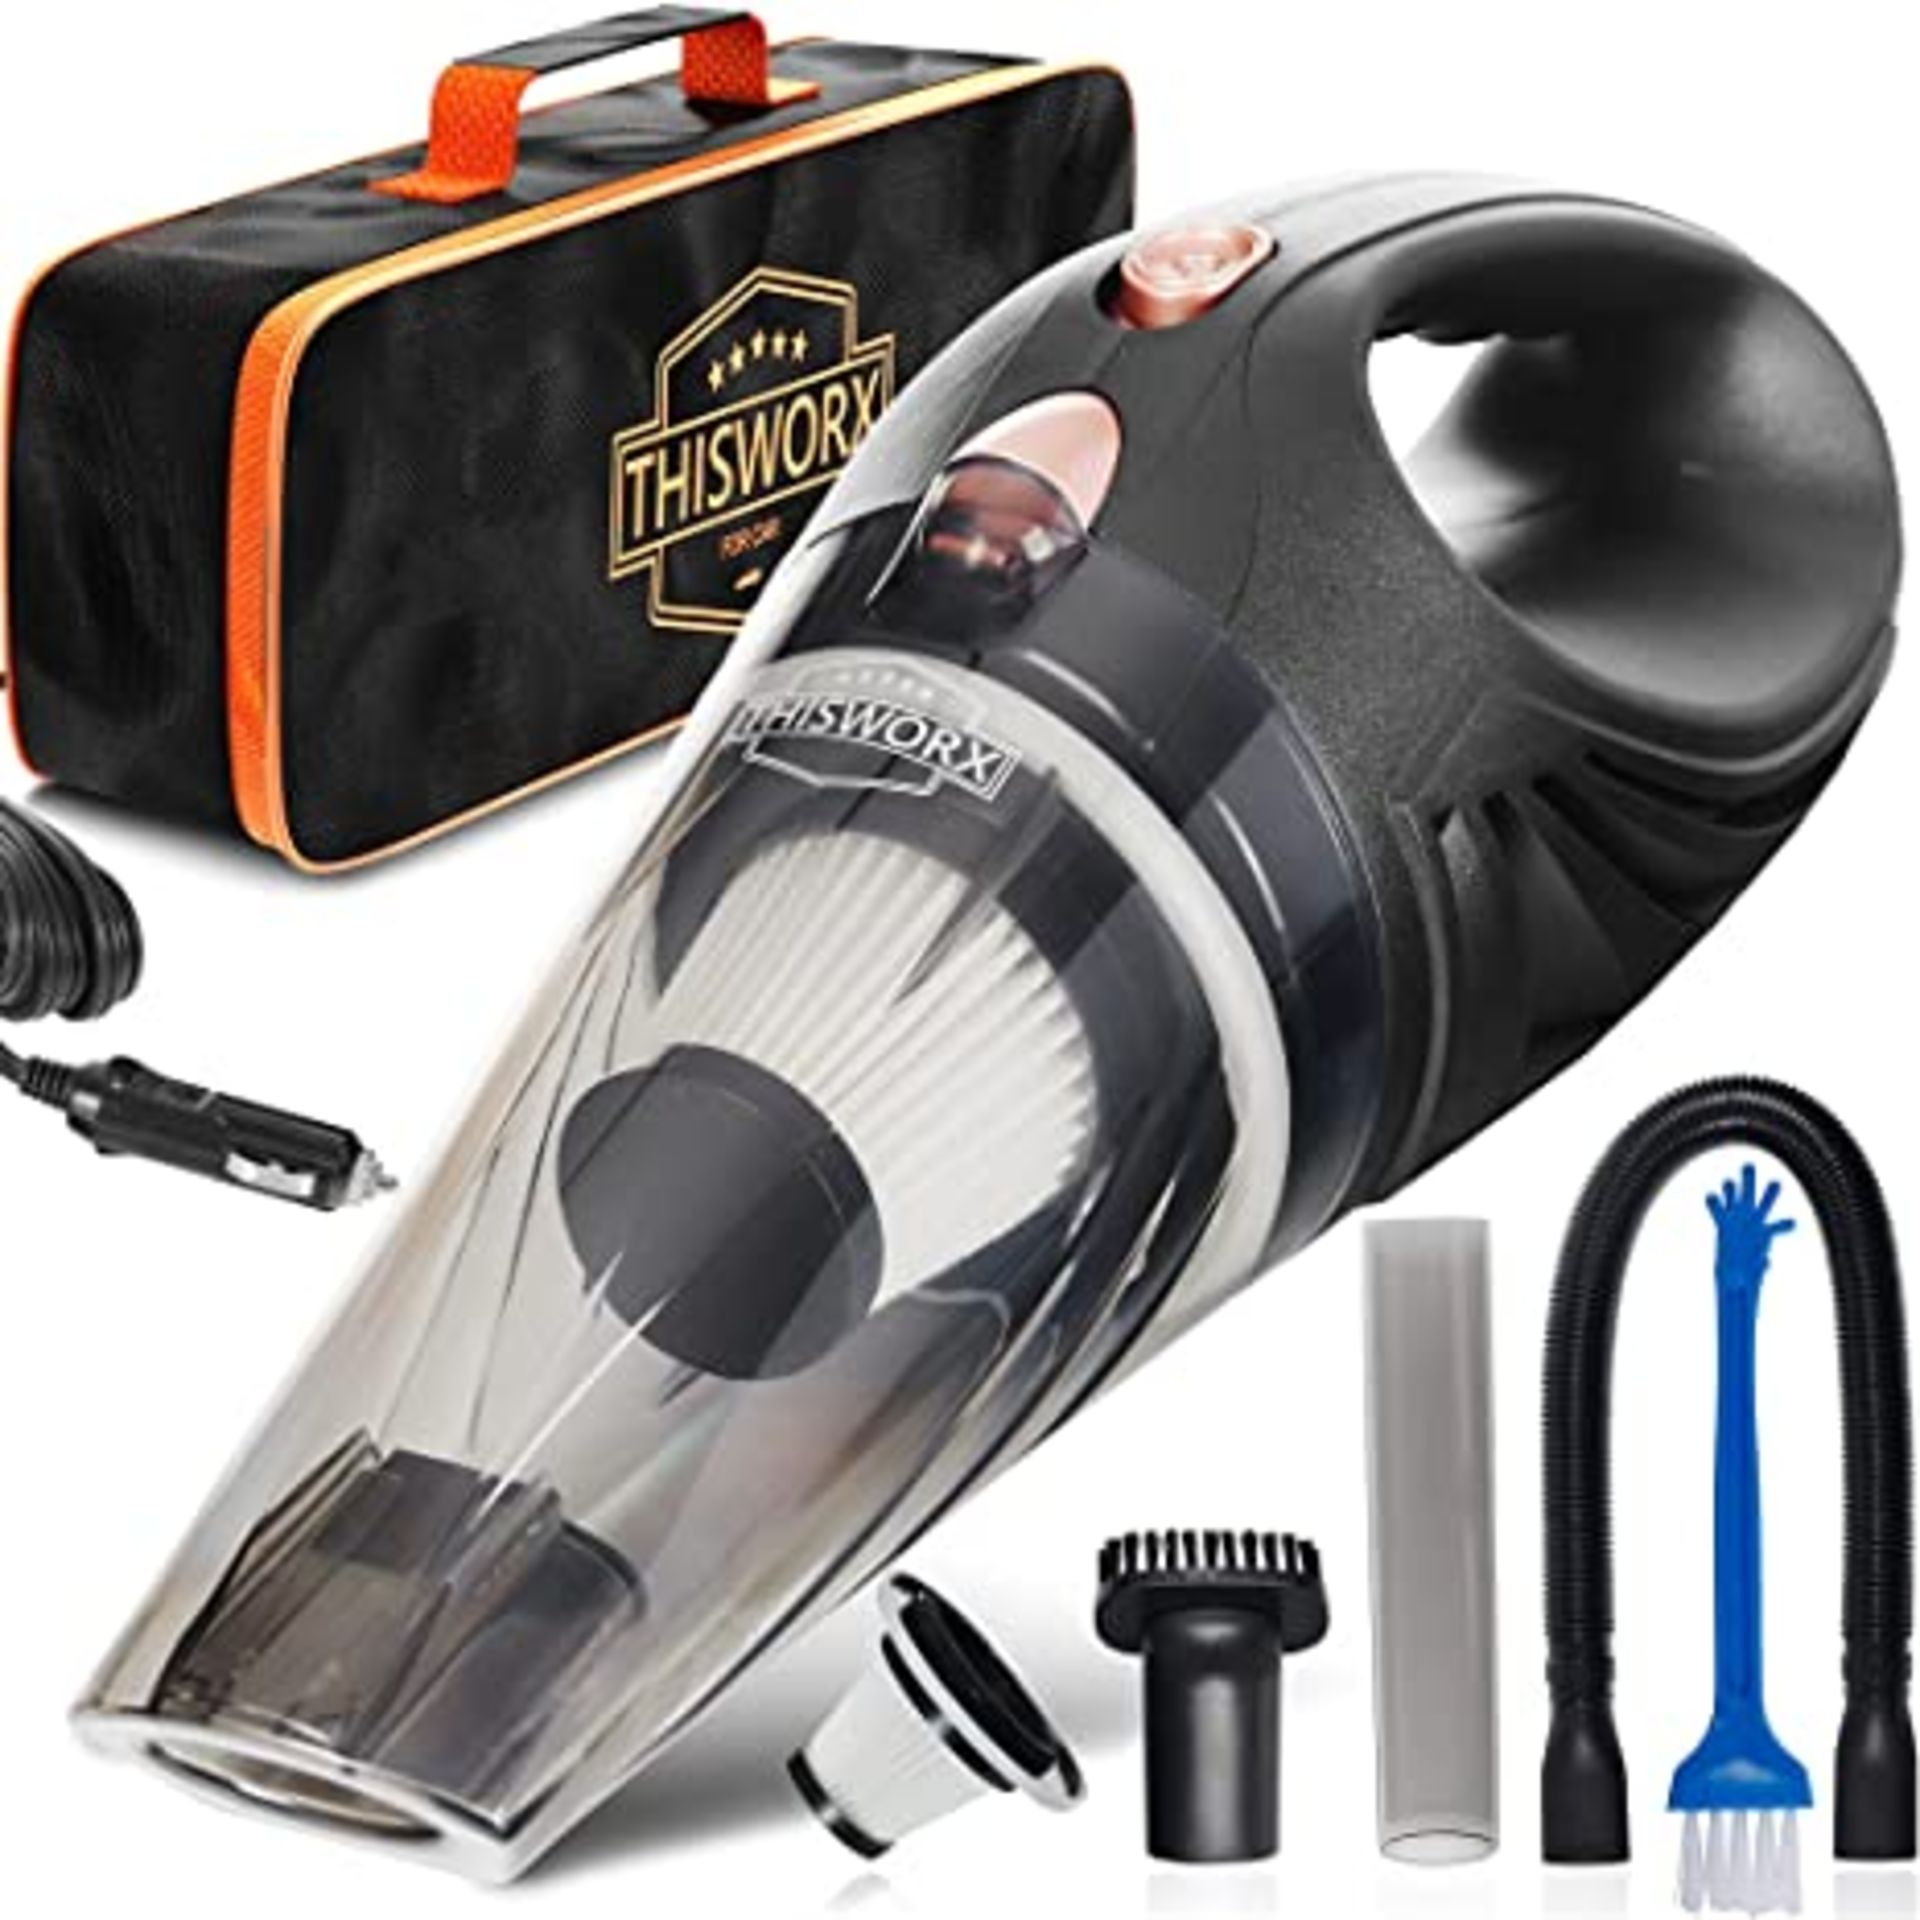 RRP - £22.19 ThisWorx Car Vacuum Cleaner - Portable, Lightweight, Powerful, Handheld Vacuums w/Stron